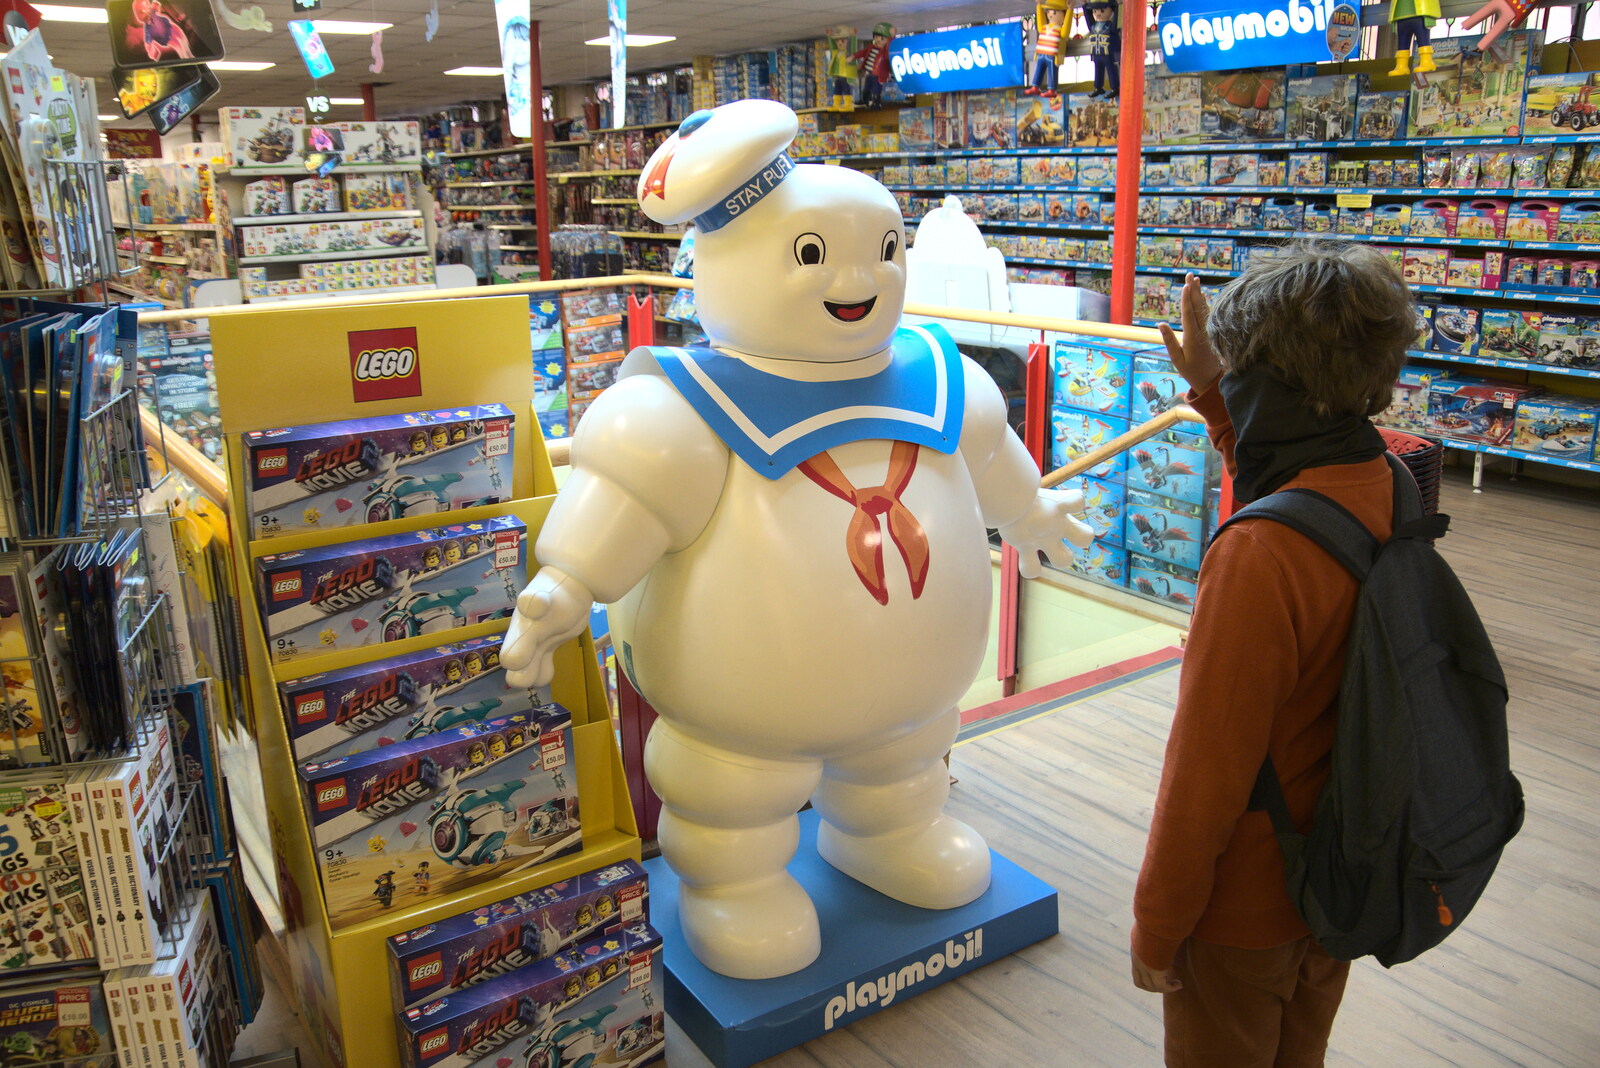 Fred waves to the Staypuft Marshmallow man from A Trip to Noddy's, and Dublin City Centre, Wicklow and Dublin, Ireland - 16th August 2021